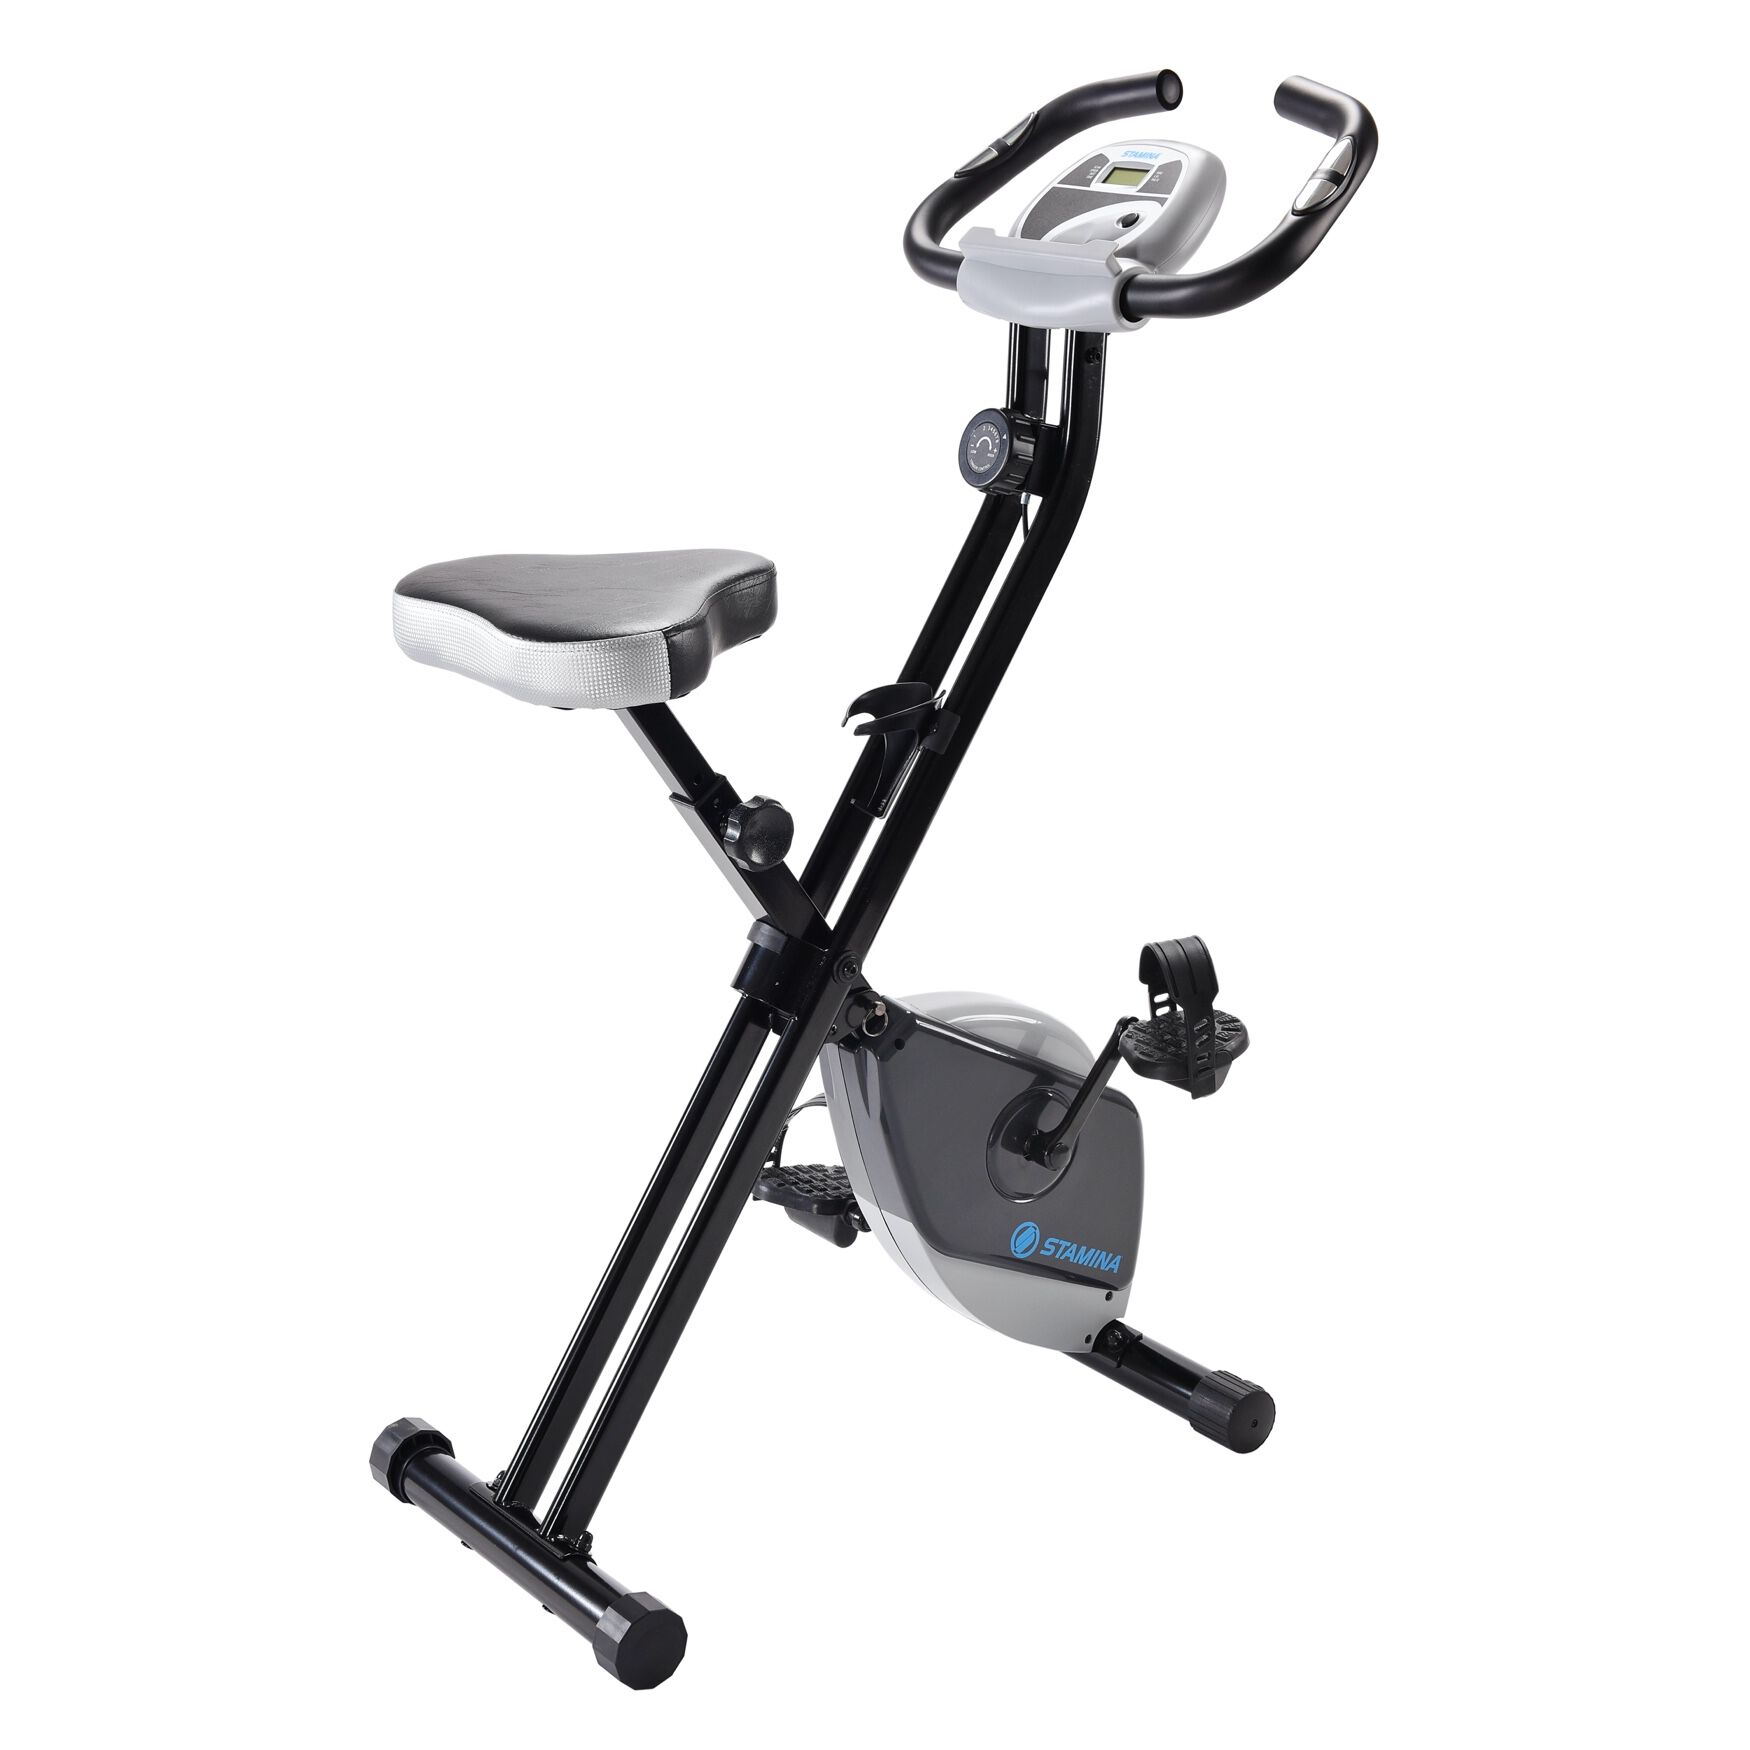 Stamina Cardio Folding Exercise Bike With Heart Rate Sensors for sale online 